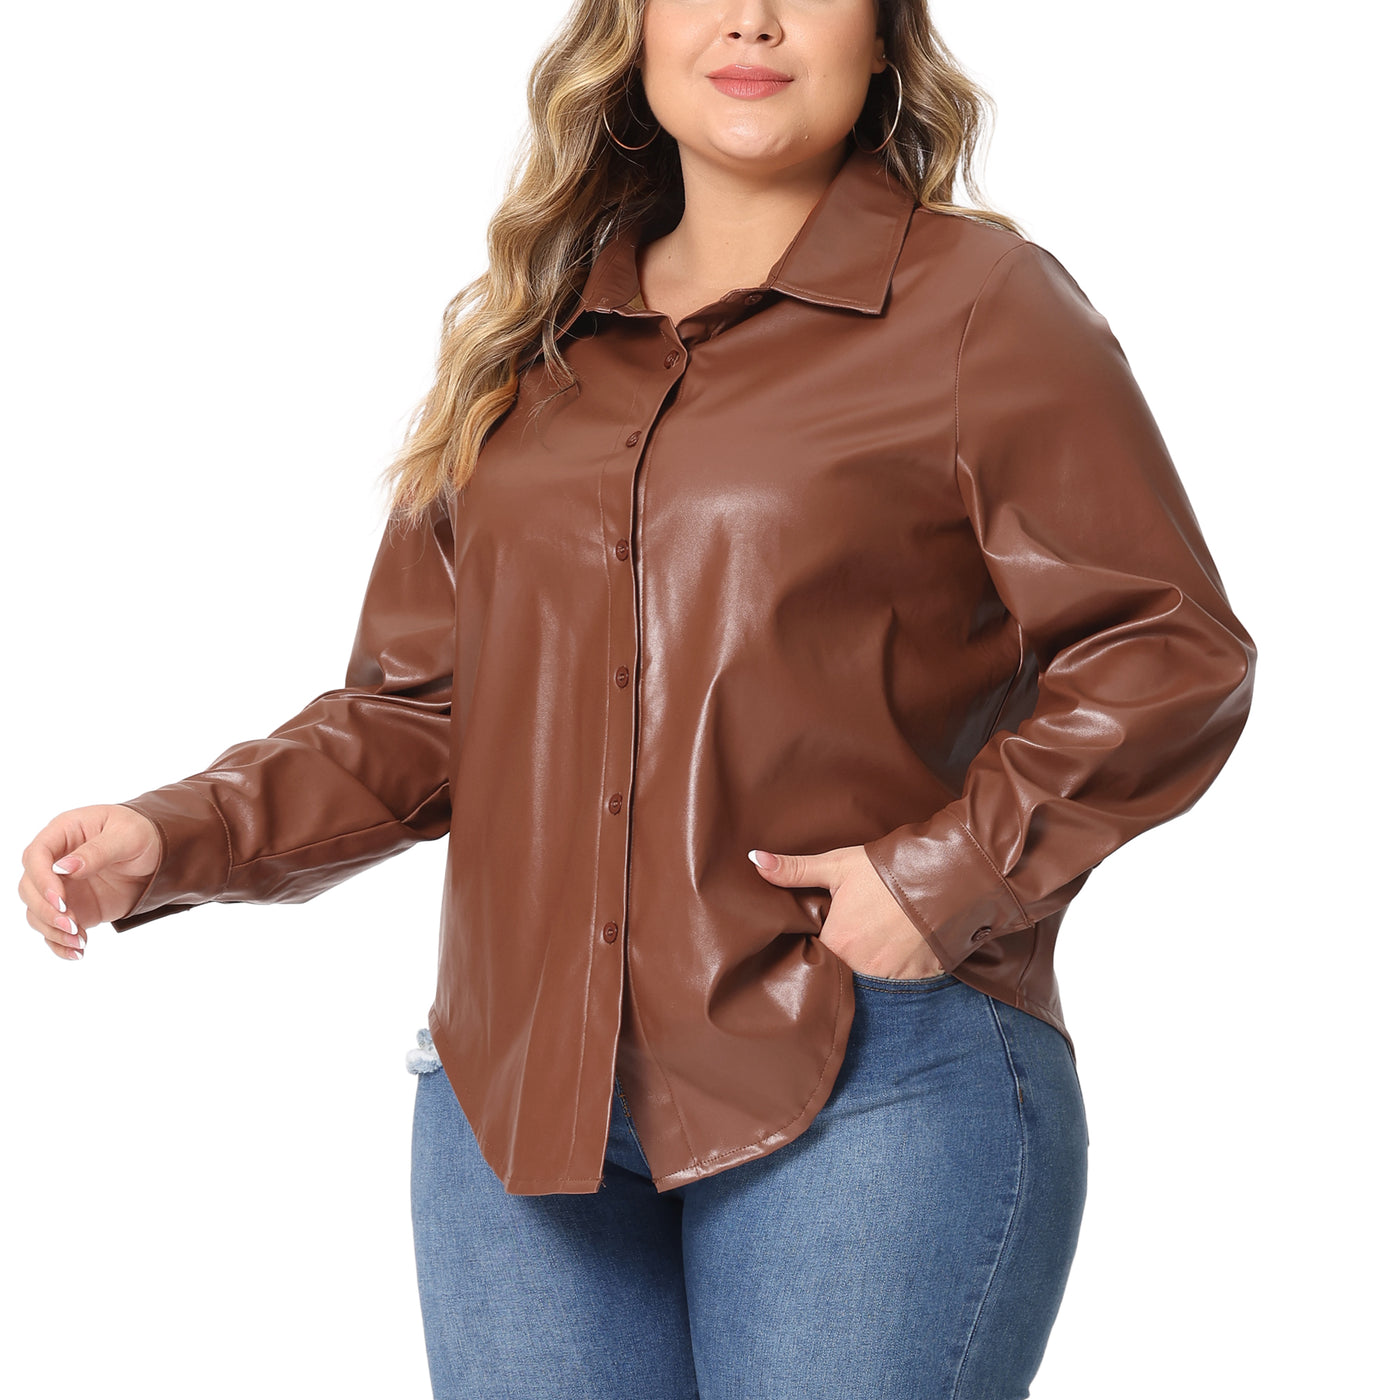 Bublédon Plus Size Faux Leather Shirts for Women Loose Fit Blazer Long Sleeves Button Motorcycle Biker Coat Casual Jacket